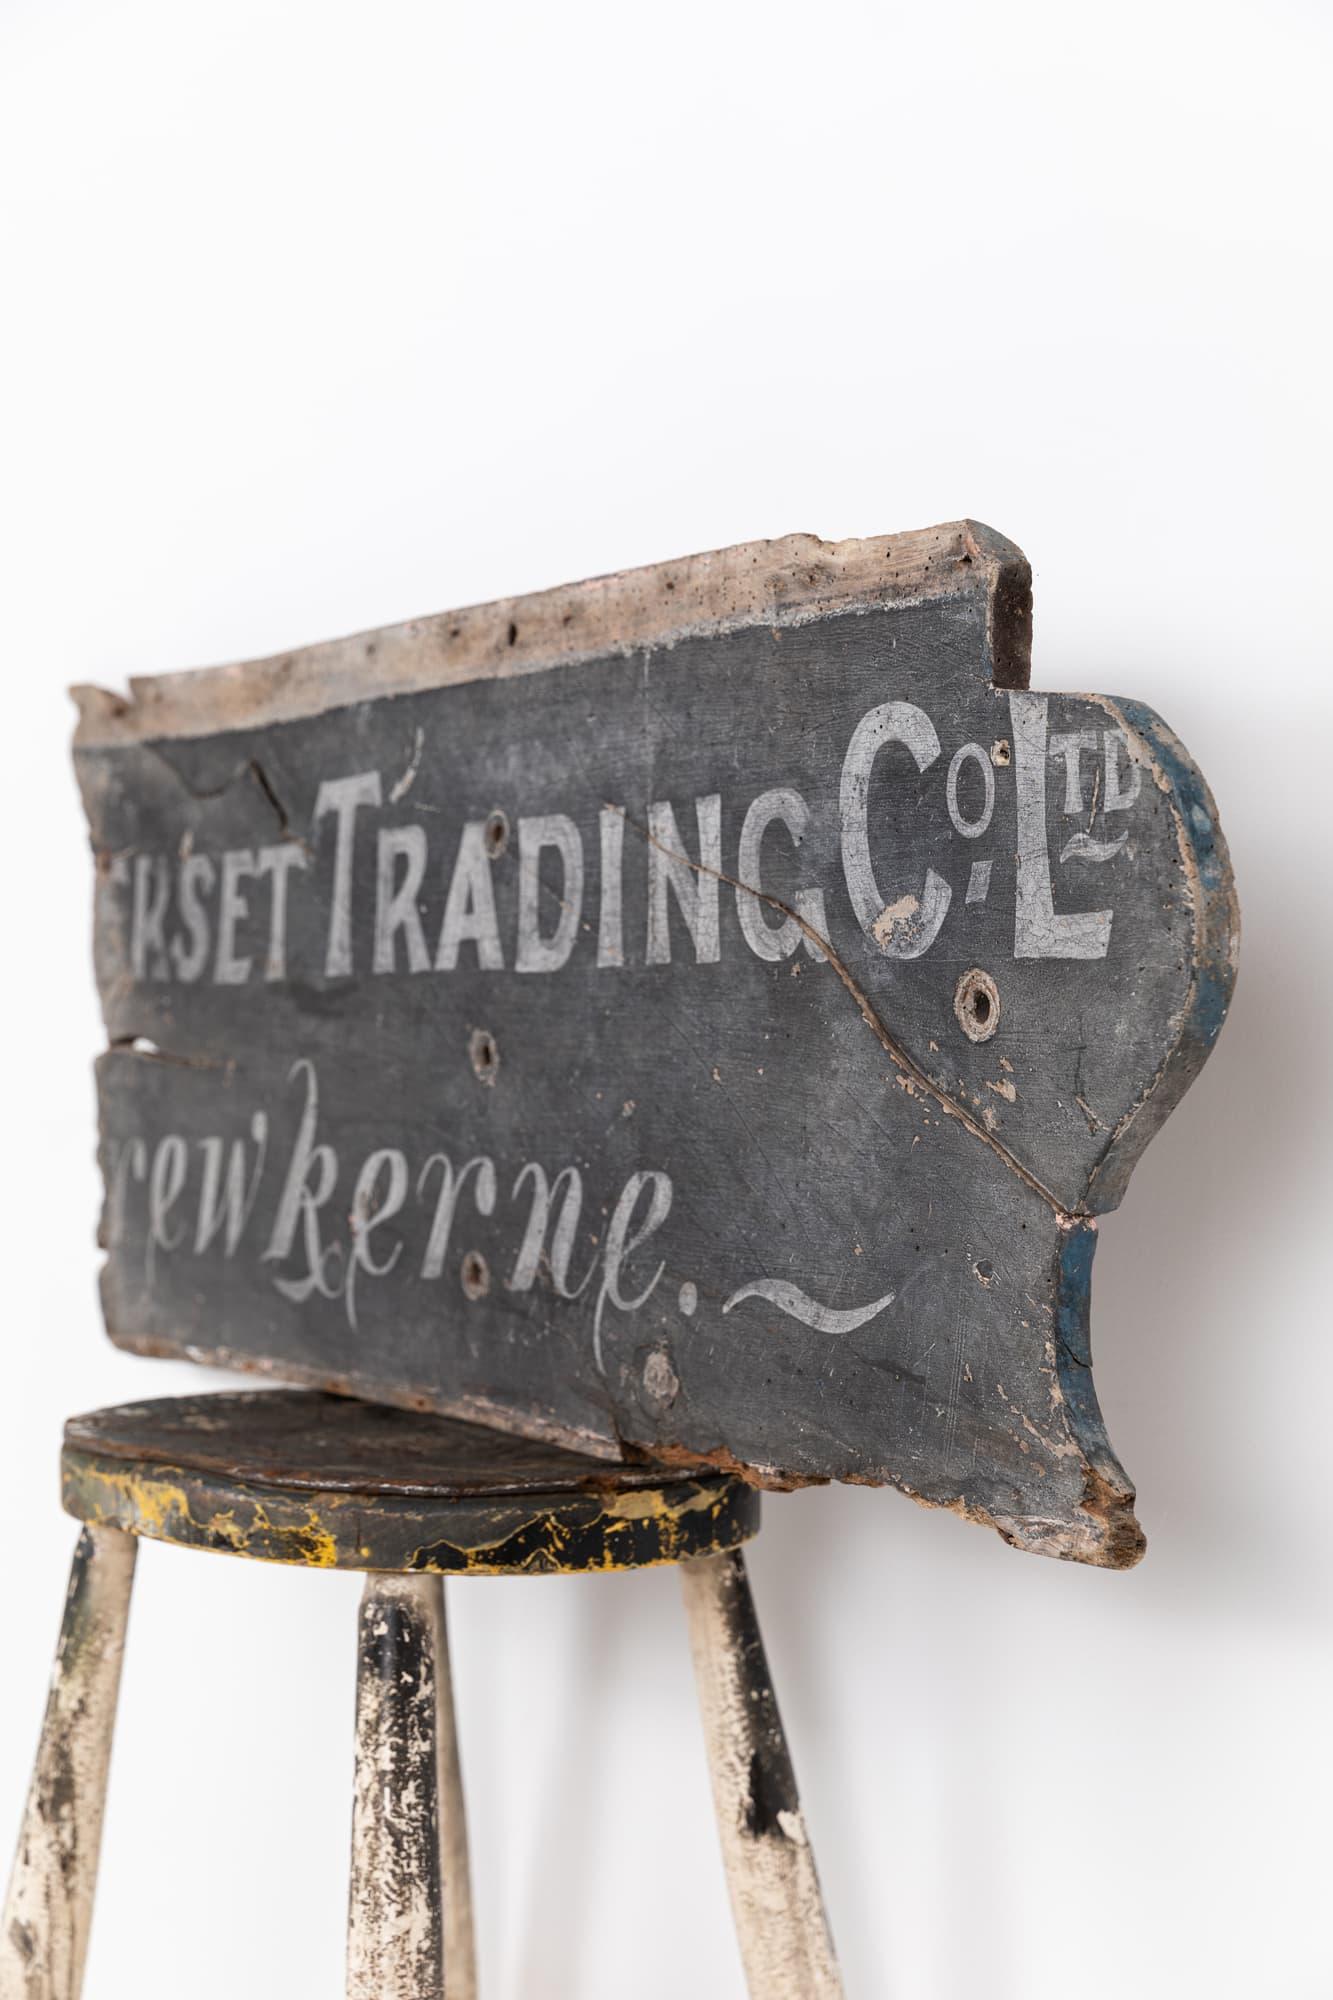 Hand-Painted Hand Painted Industrial 'Somerset Trading Co Ltd' Wall Sign Plaque, C.1920